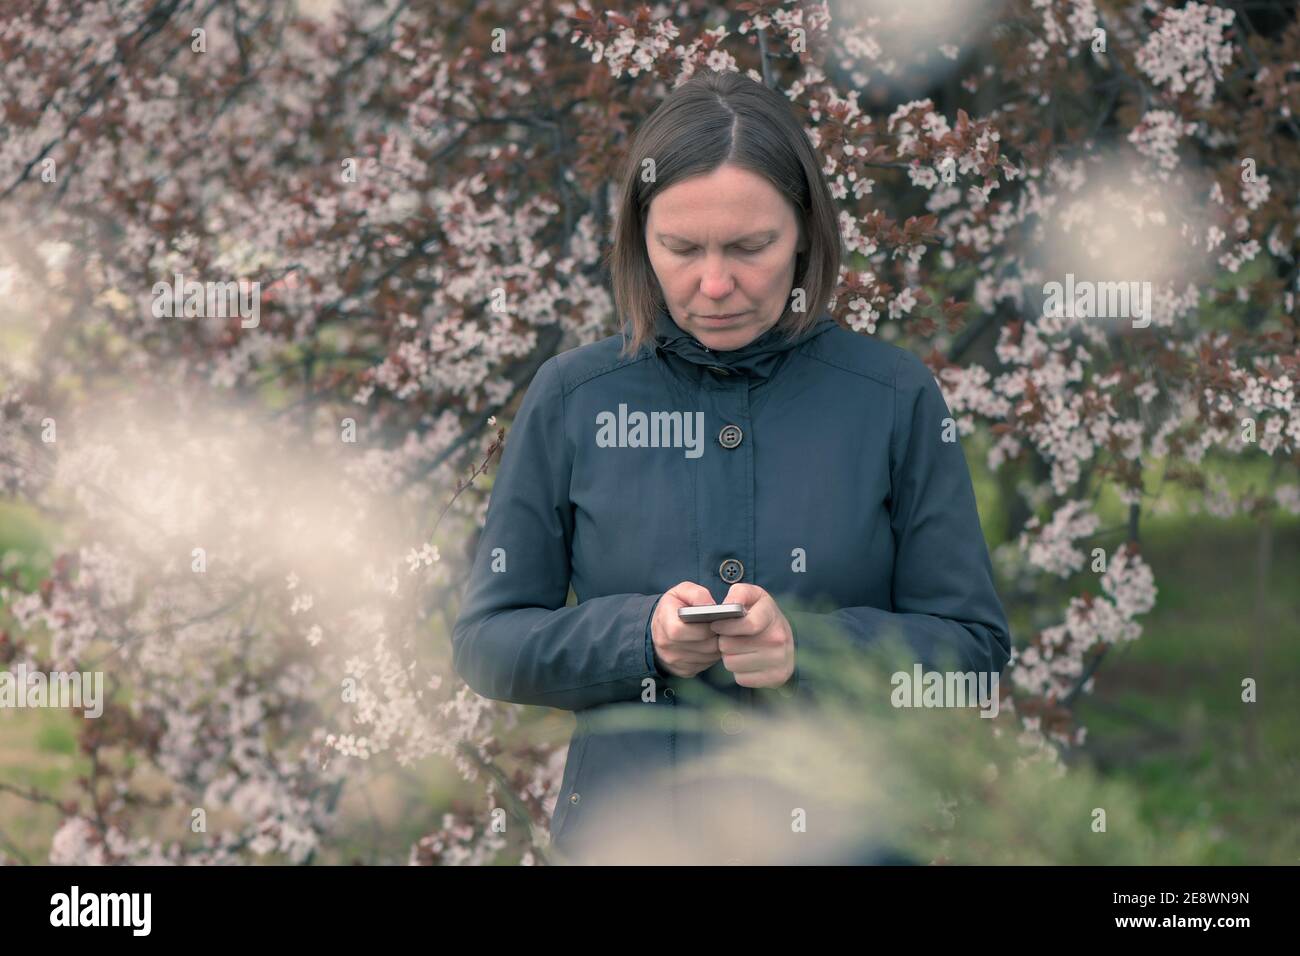 Woman text messaging on mobile phone under the blossoming cherry tree in springtime Stock Photo